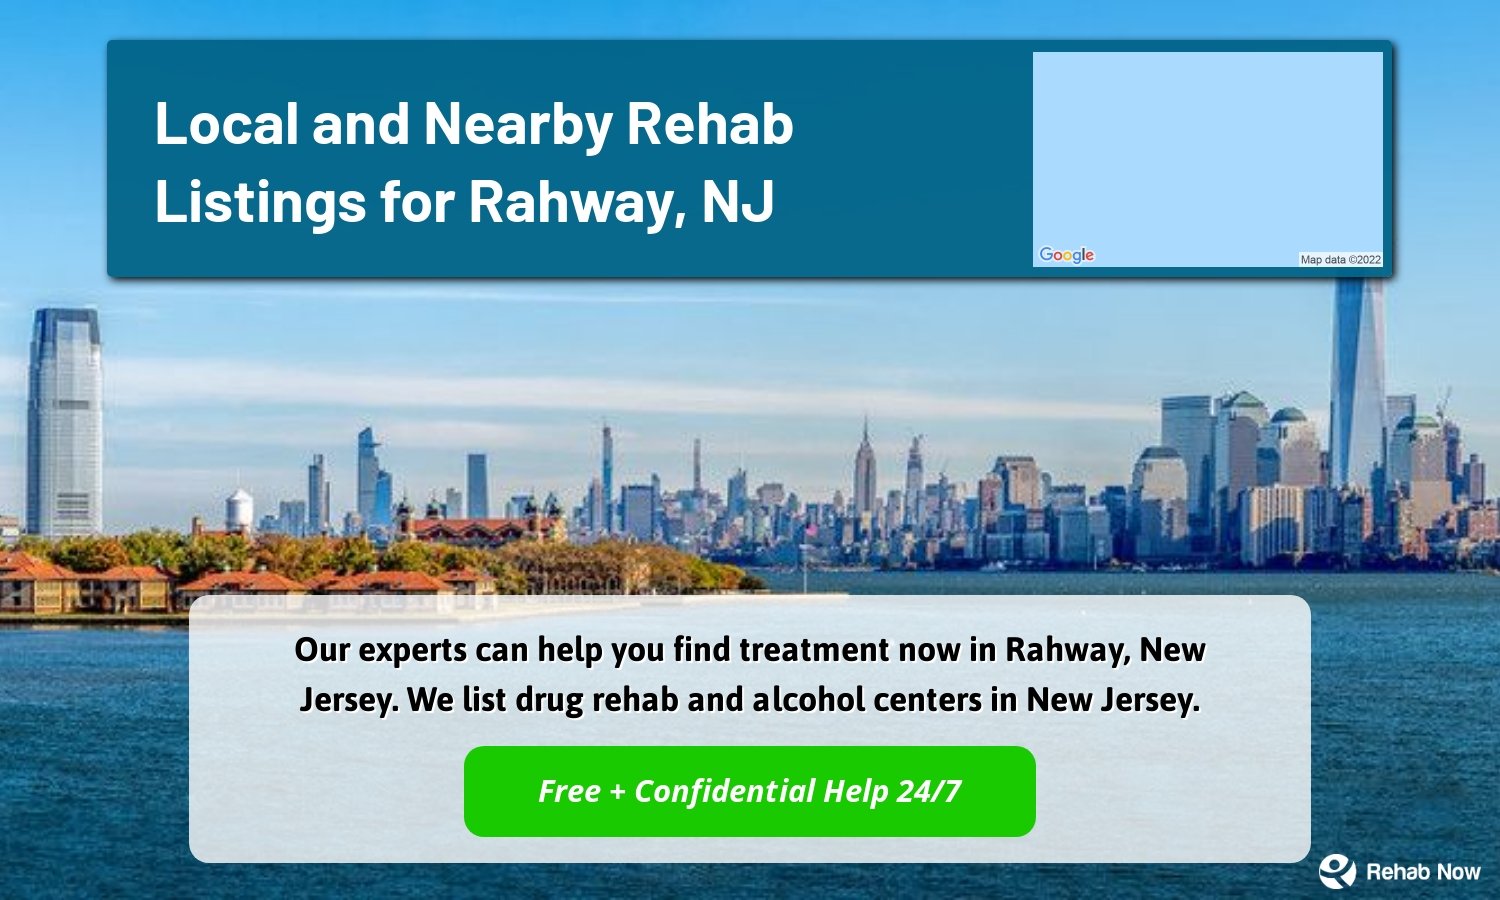 Our experts can help you find treatment now in Rahway, New Jersey. We list drug rehab and alcohol centers in New Jersey.